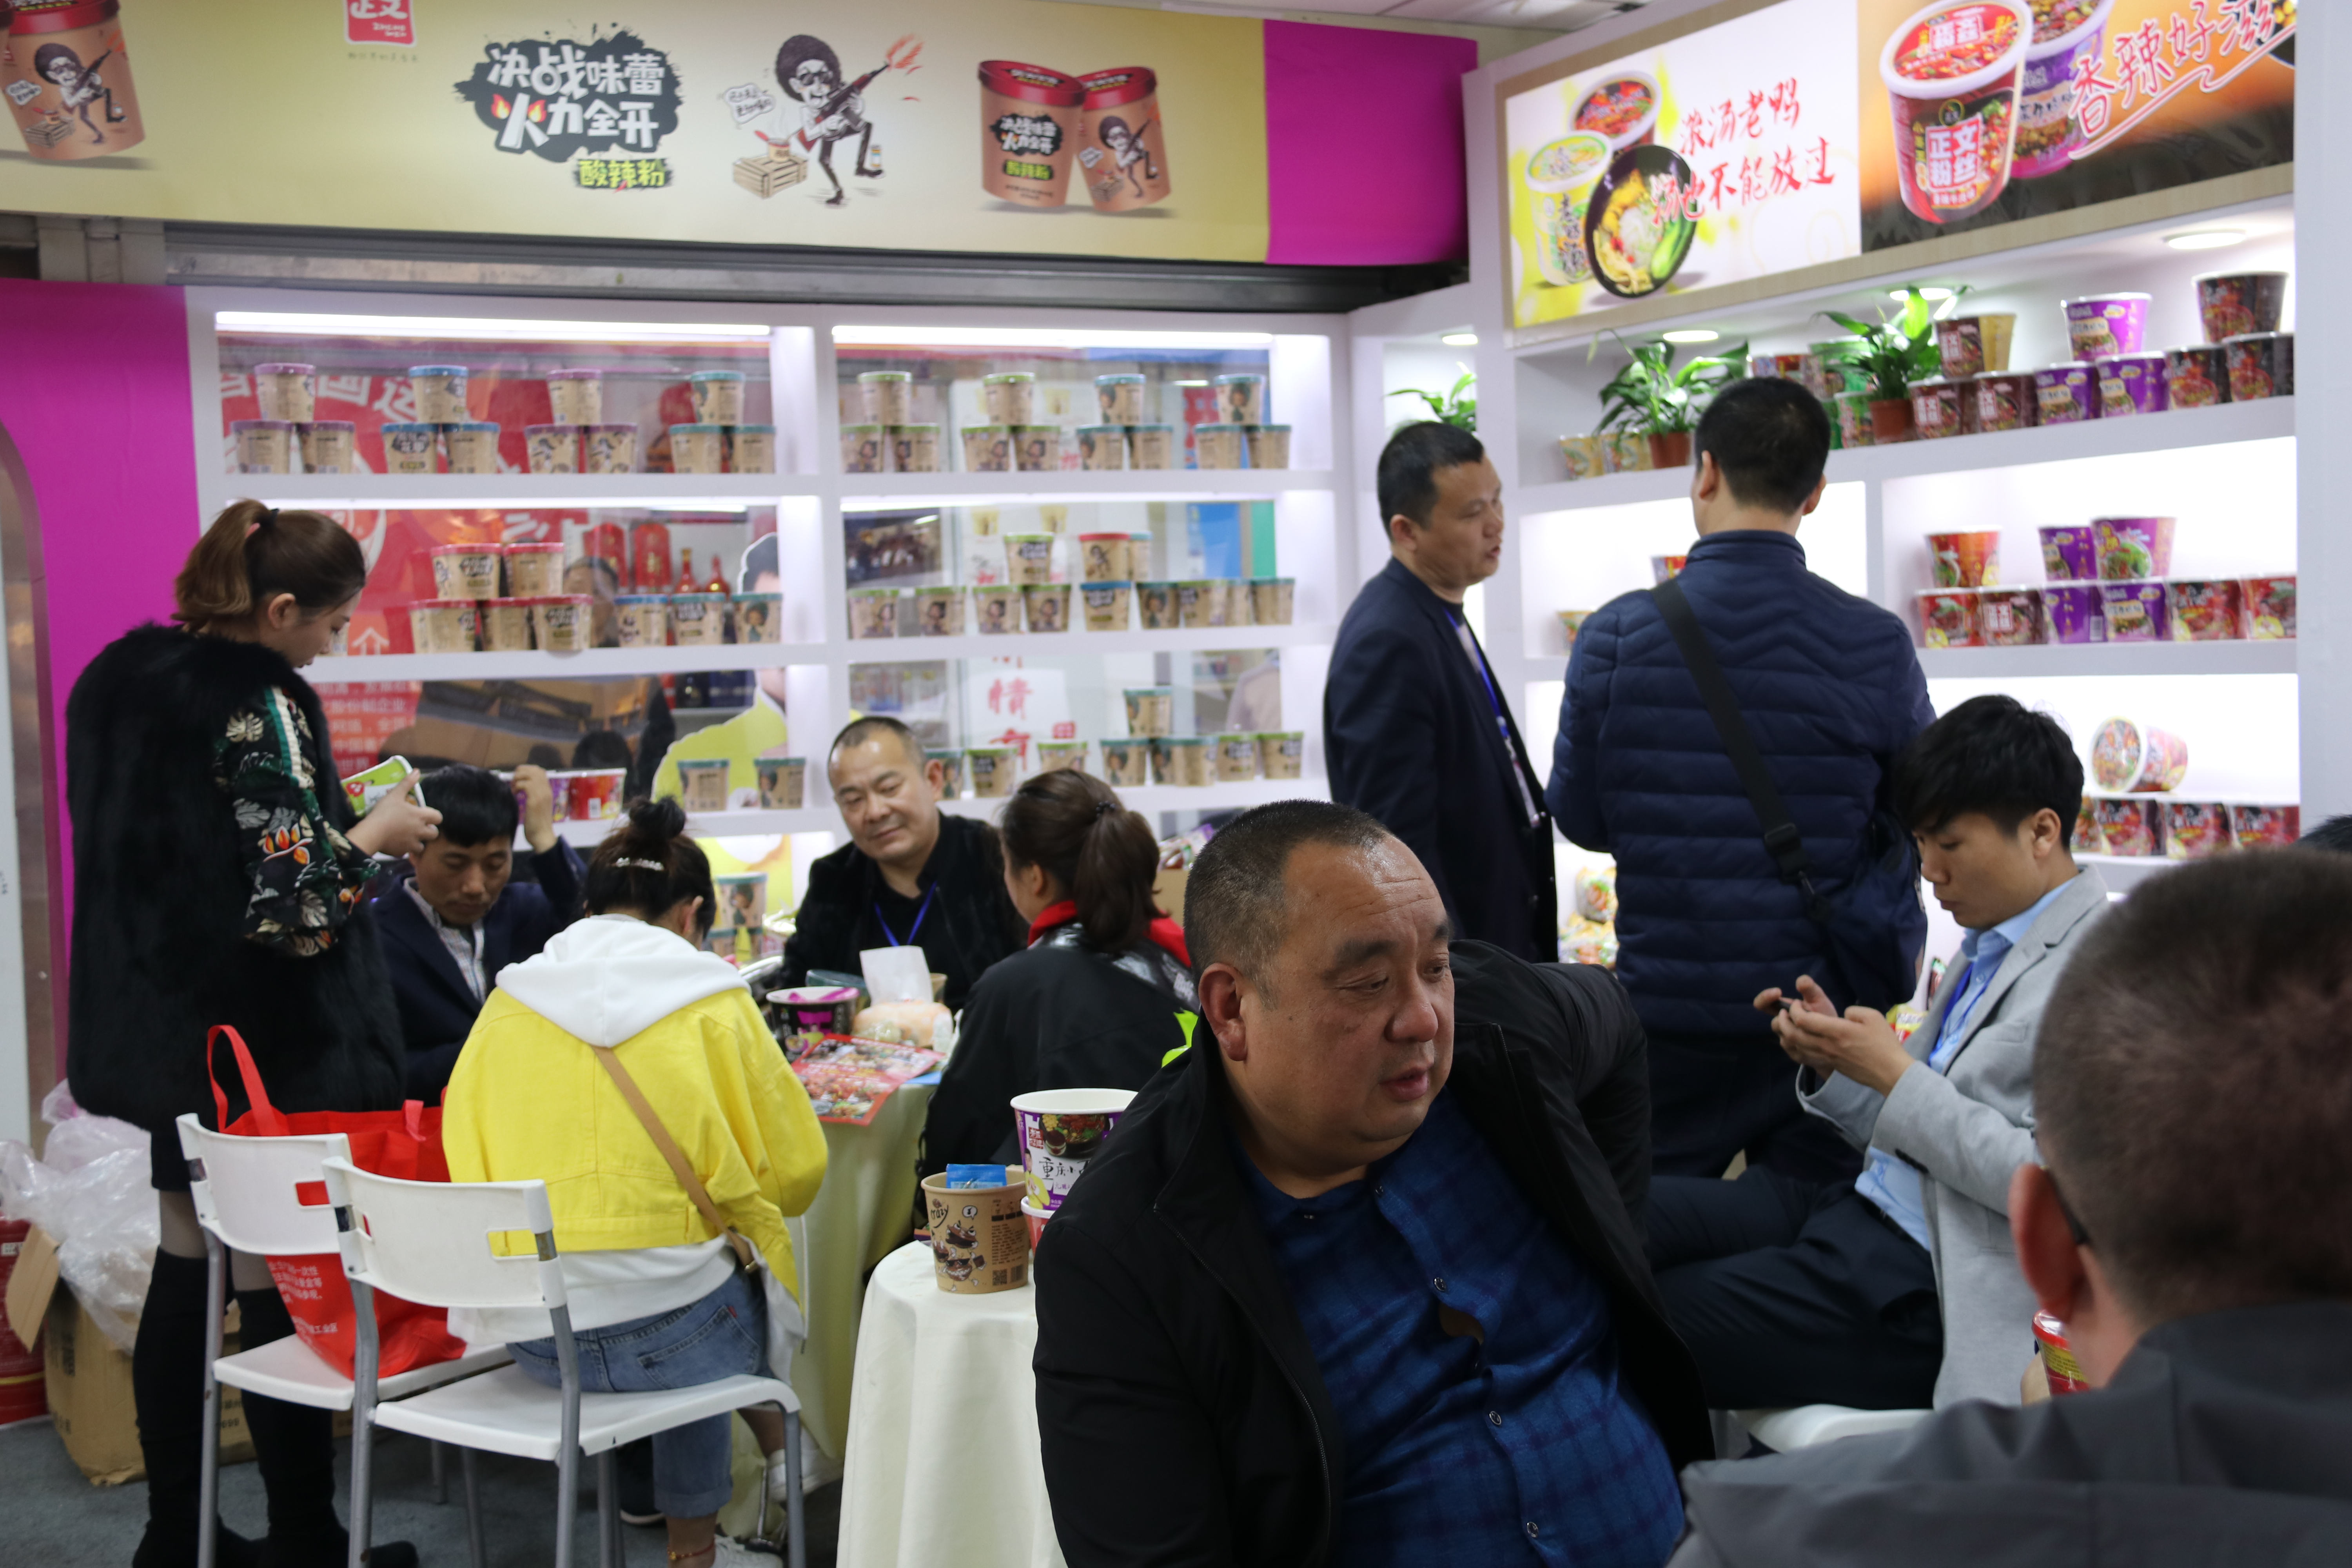 2021 SIAL China International Food and Beverage Exhibition was held as scheduled